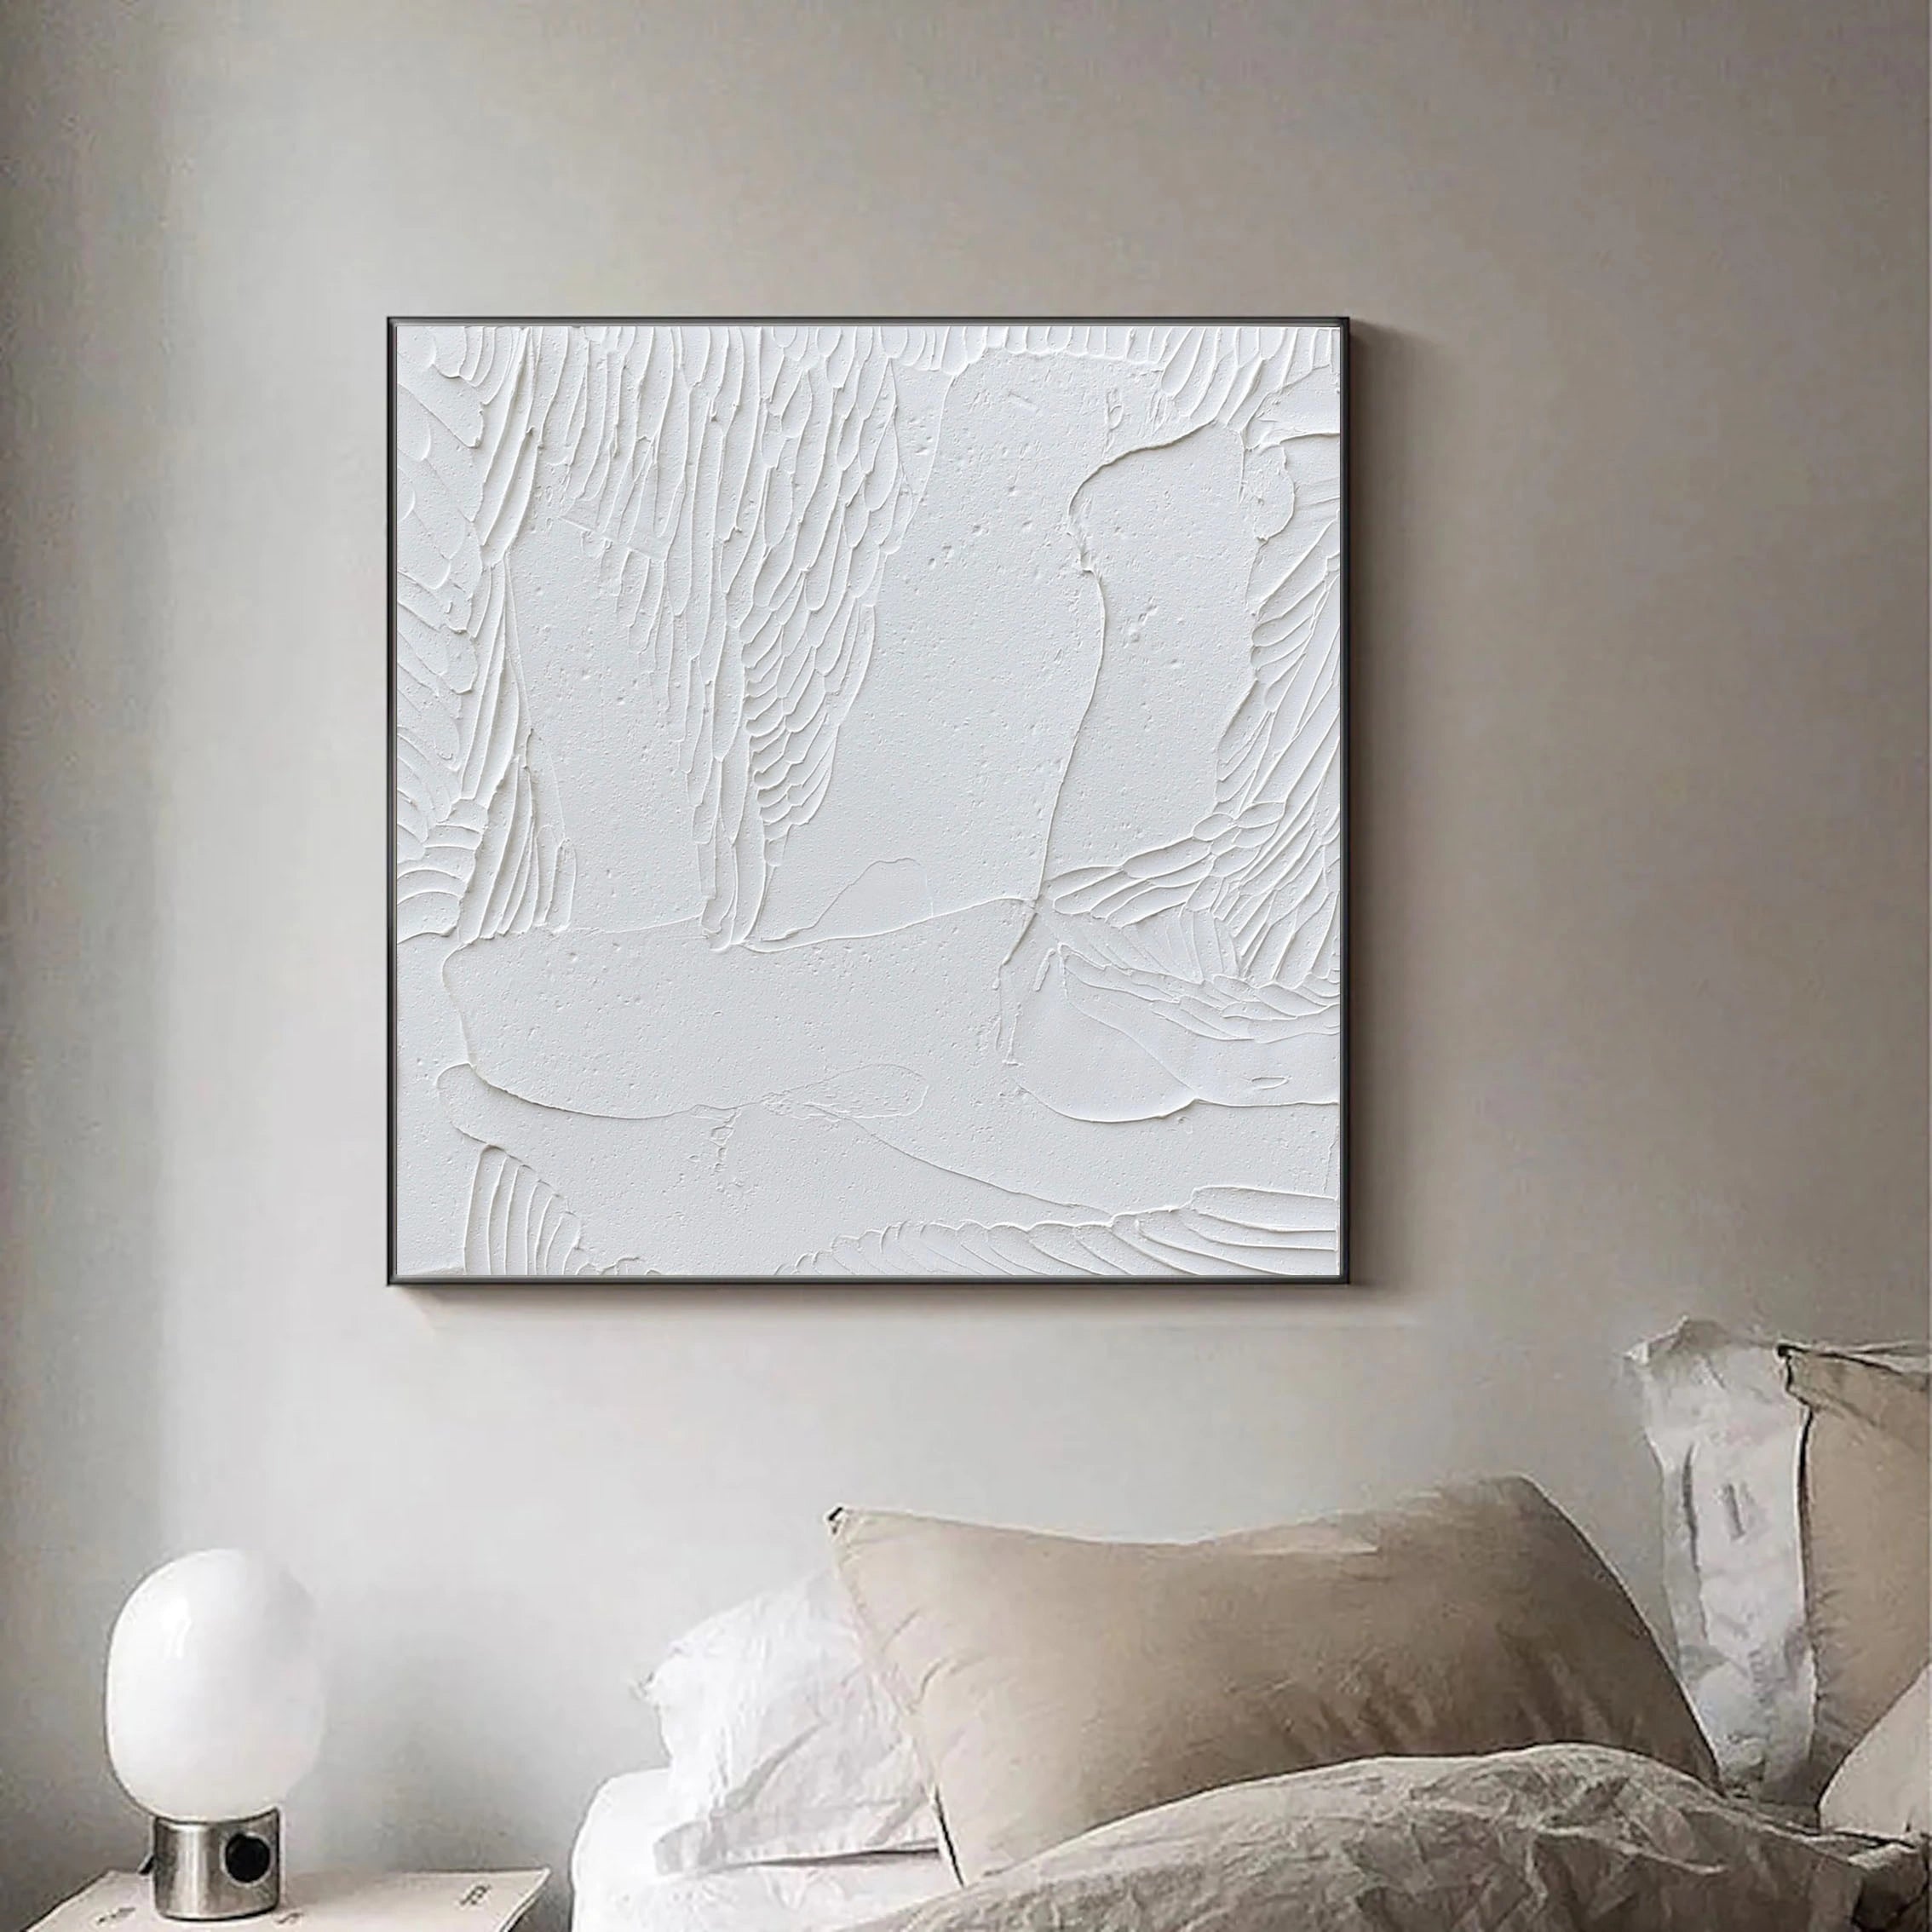 3D Textured White Plaster Art Wall Decor Painting on Canvas